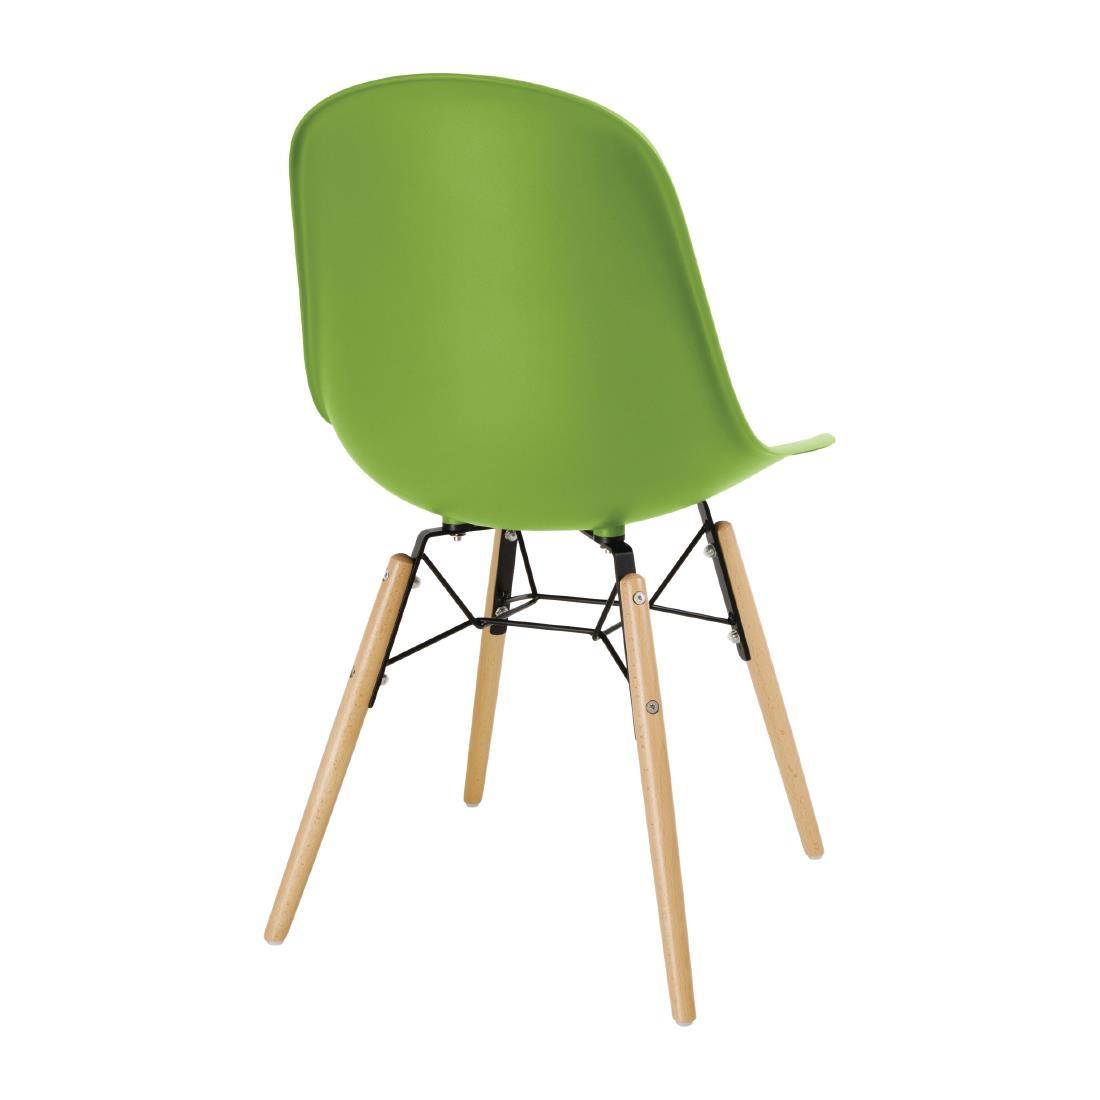 Bolero PP Moulded Side Chair Green with Spindle Legs (Pack of 2) - DM843  - 3